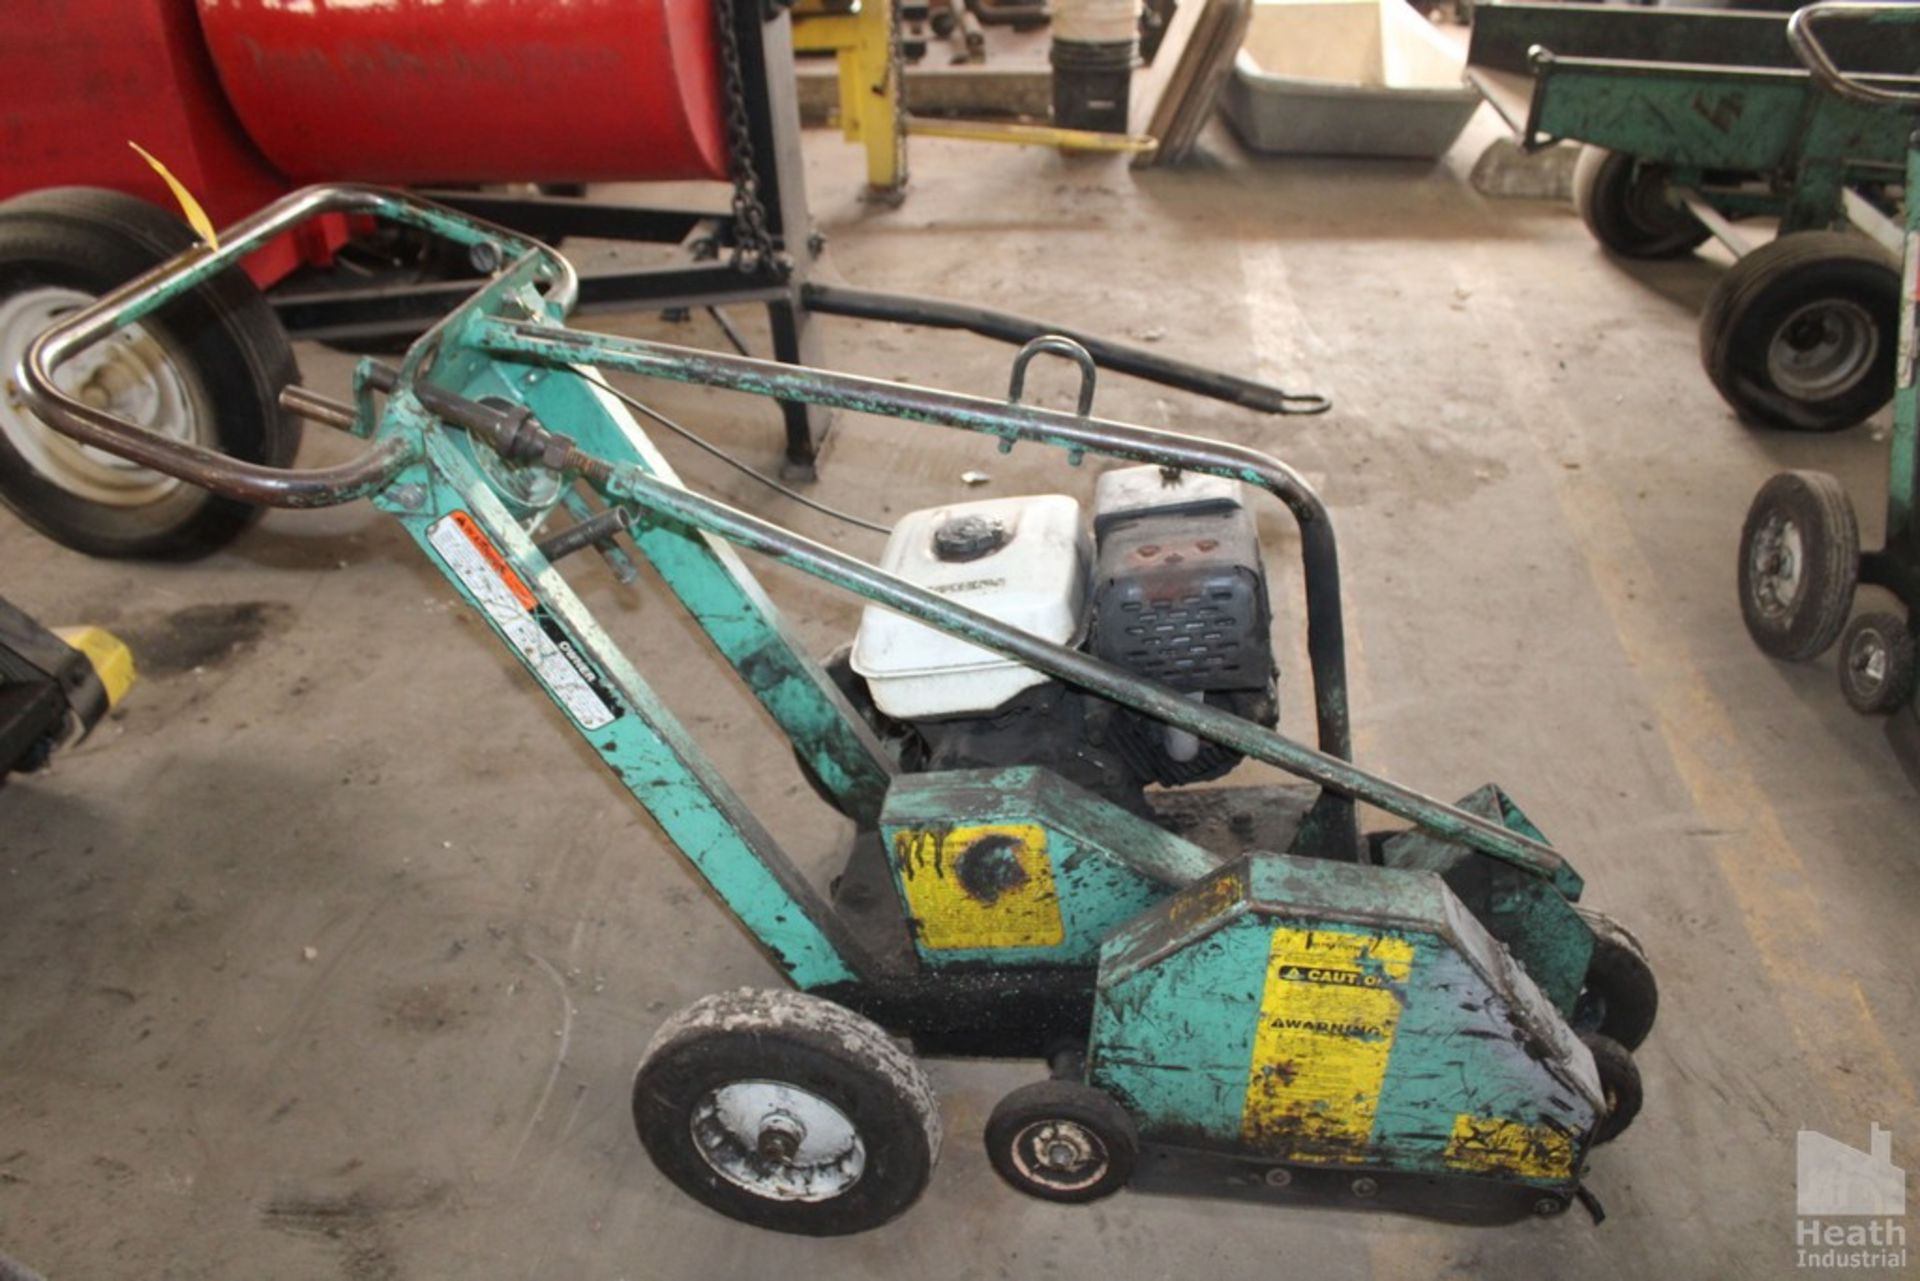 GARLOCK ULTRA CUTTER ROOFING SAW WITH HONDA GX270 GAS ENGINE - Image 2 of 3